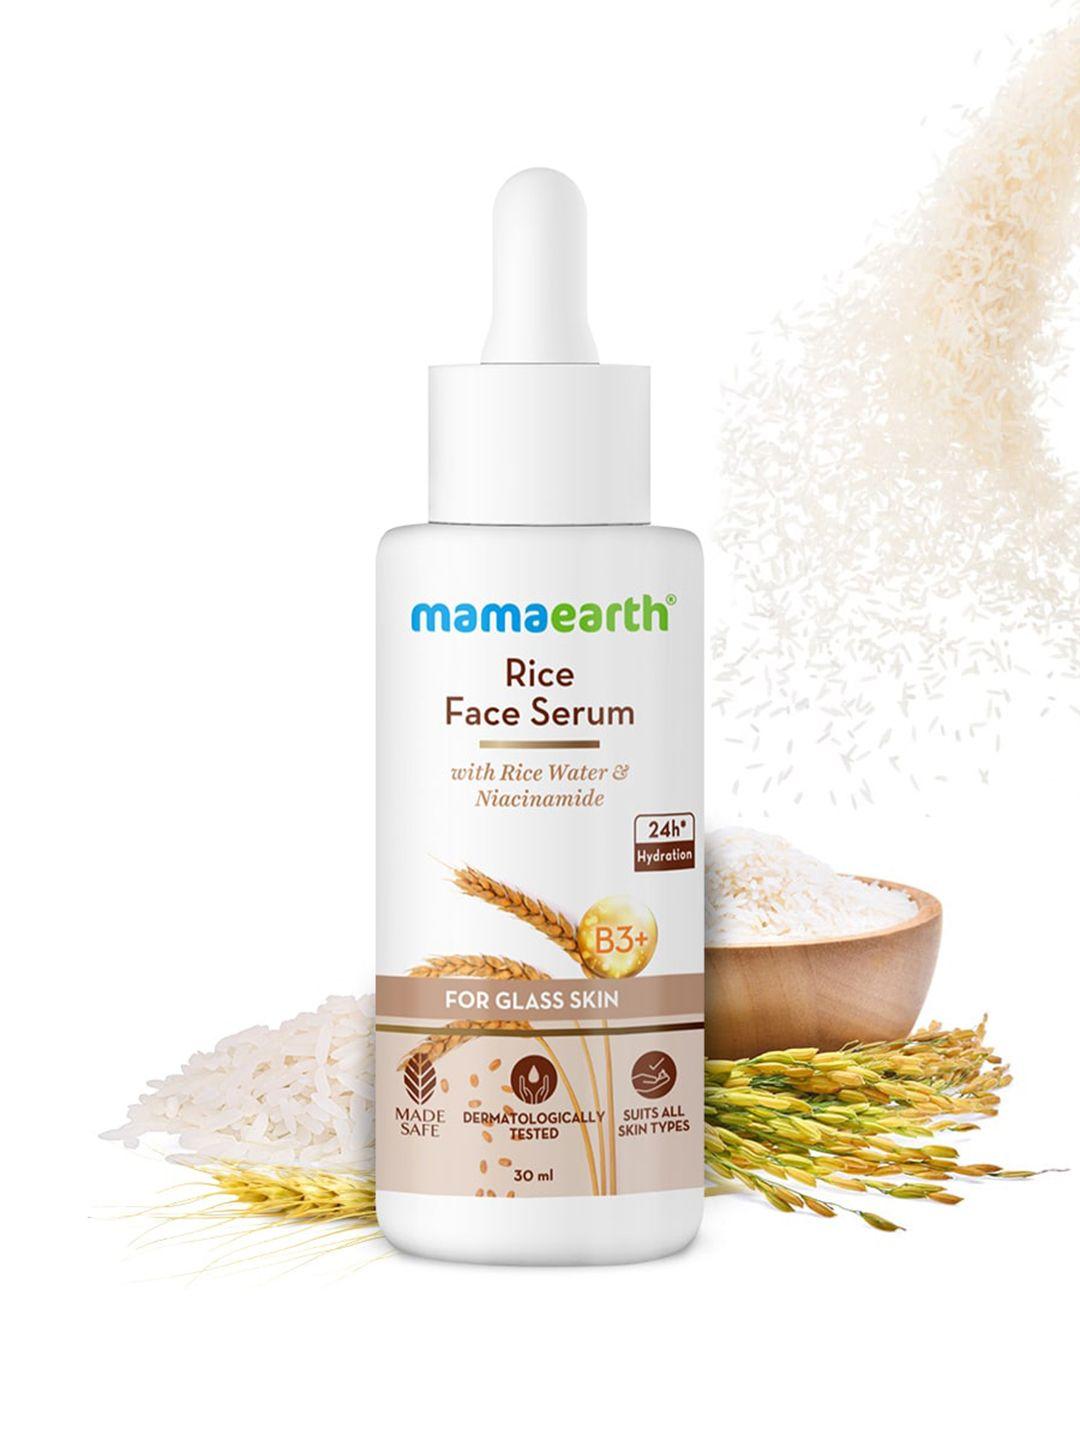 mamaearth rice face serum with rice water & niacinamide for glass skin - 30ml